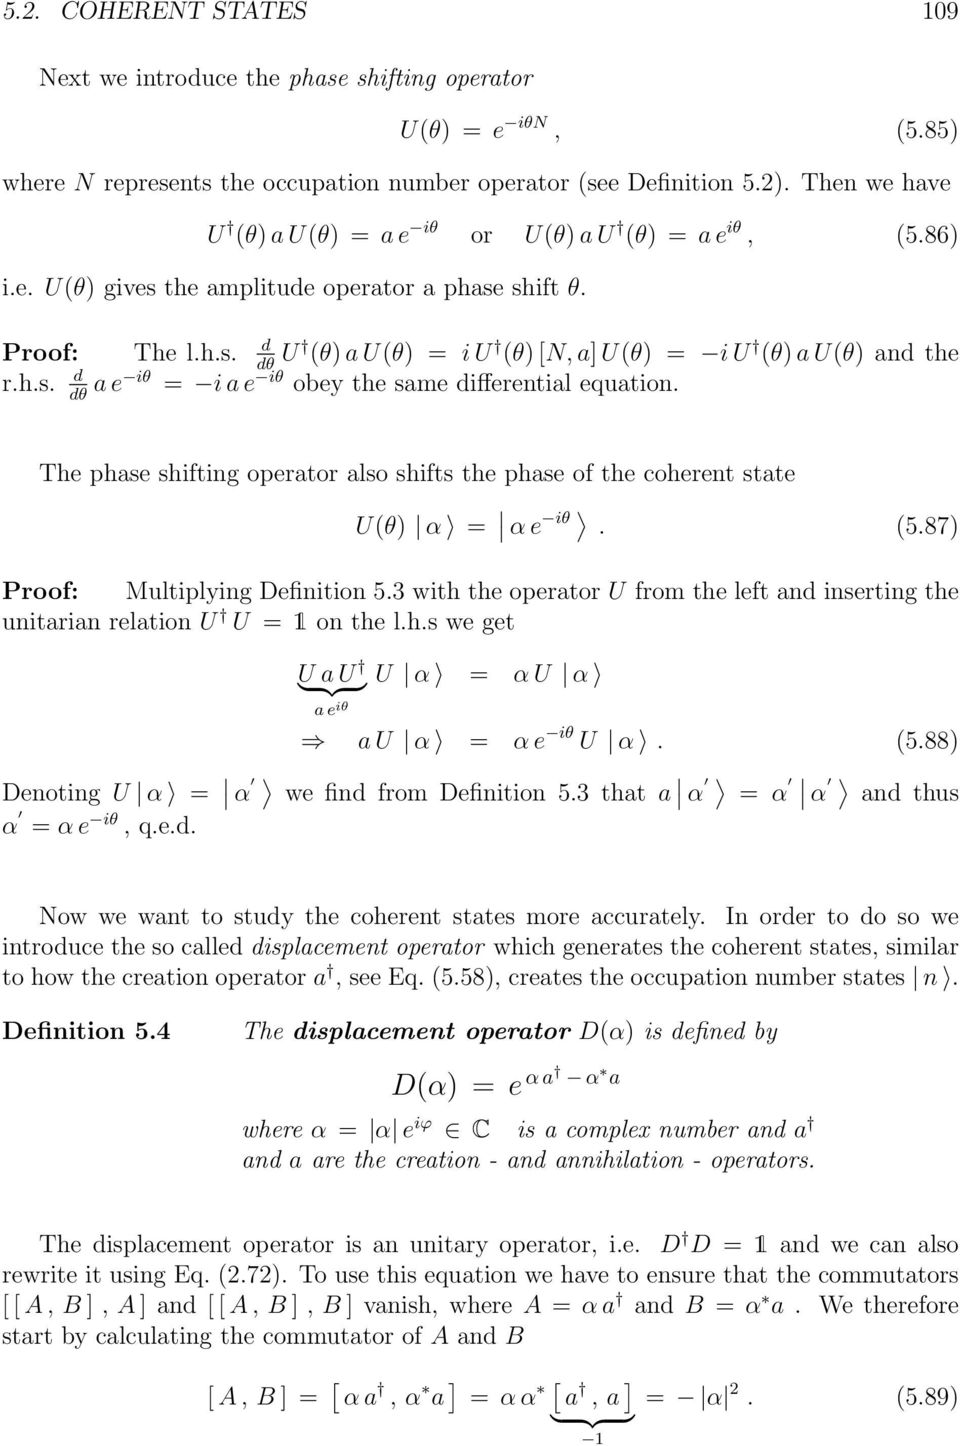 The phase shifting operator also shifts the phase of the coherent state U(θ) α = α e iθ. (5.87) Proof: Multiplying Definition 5.